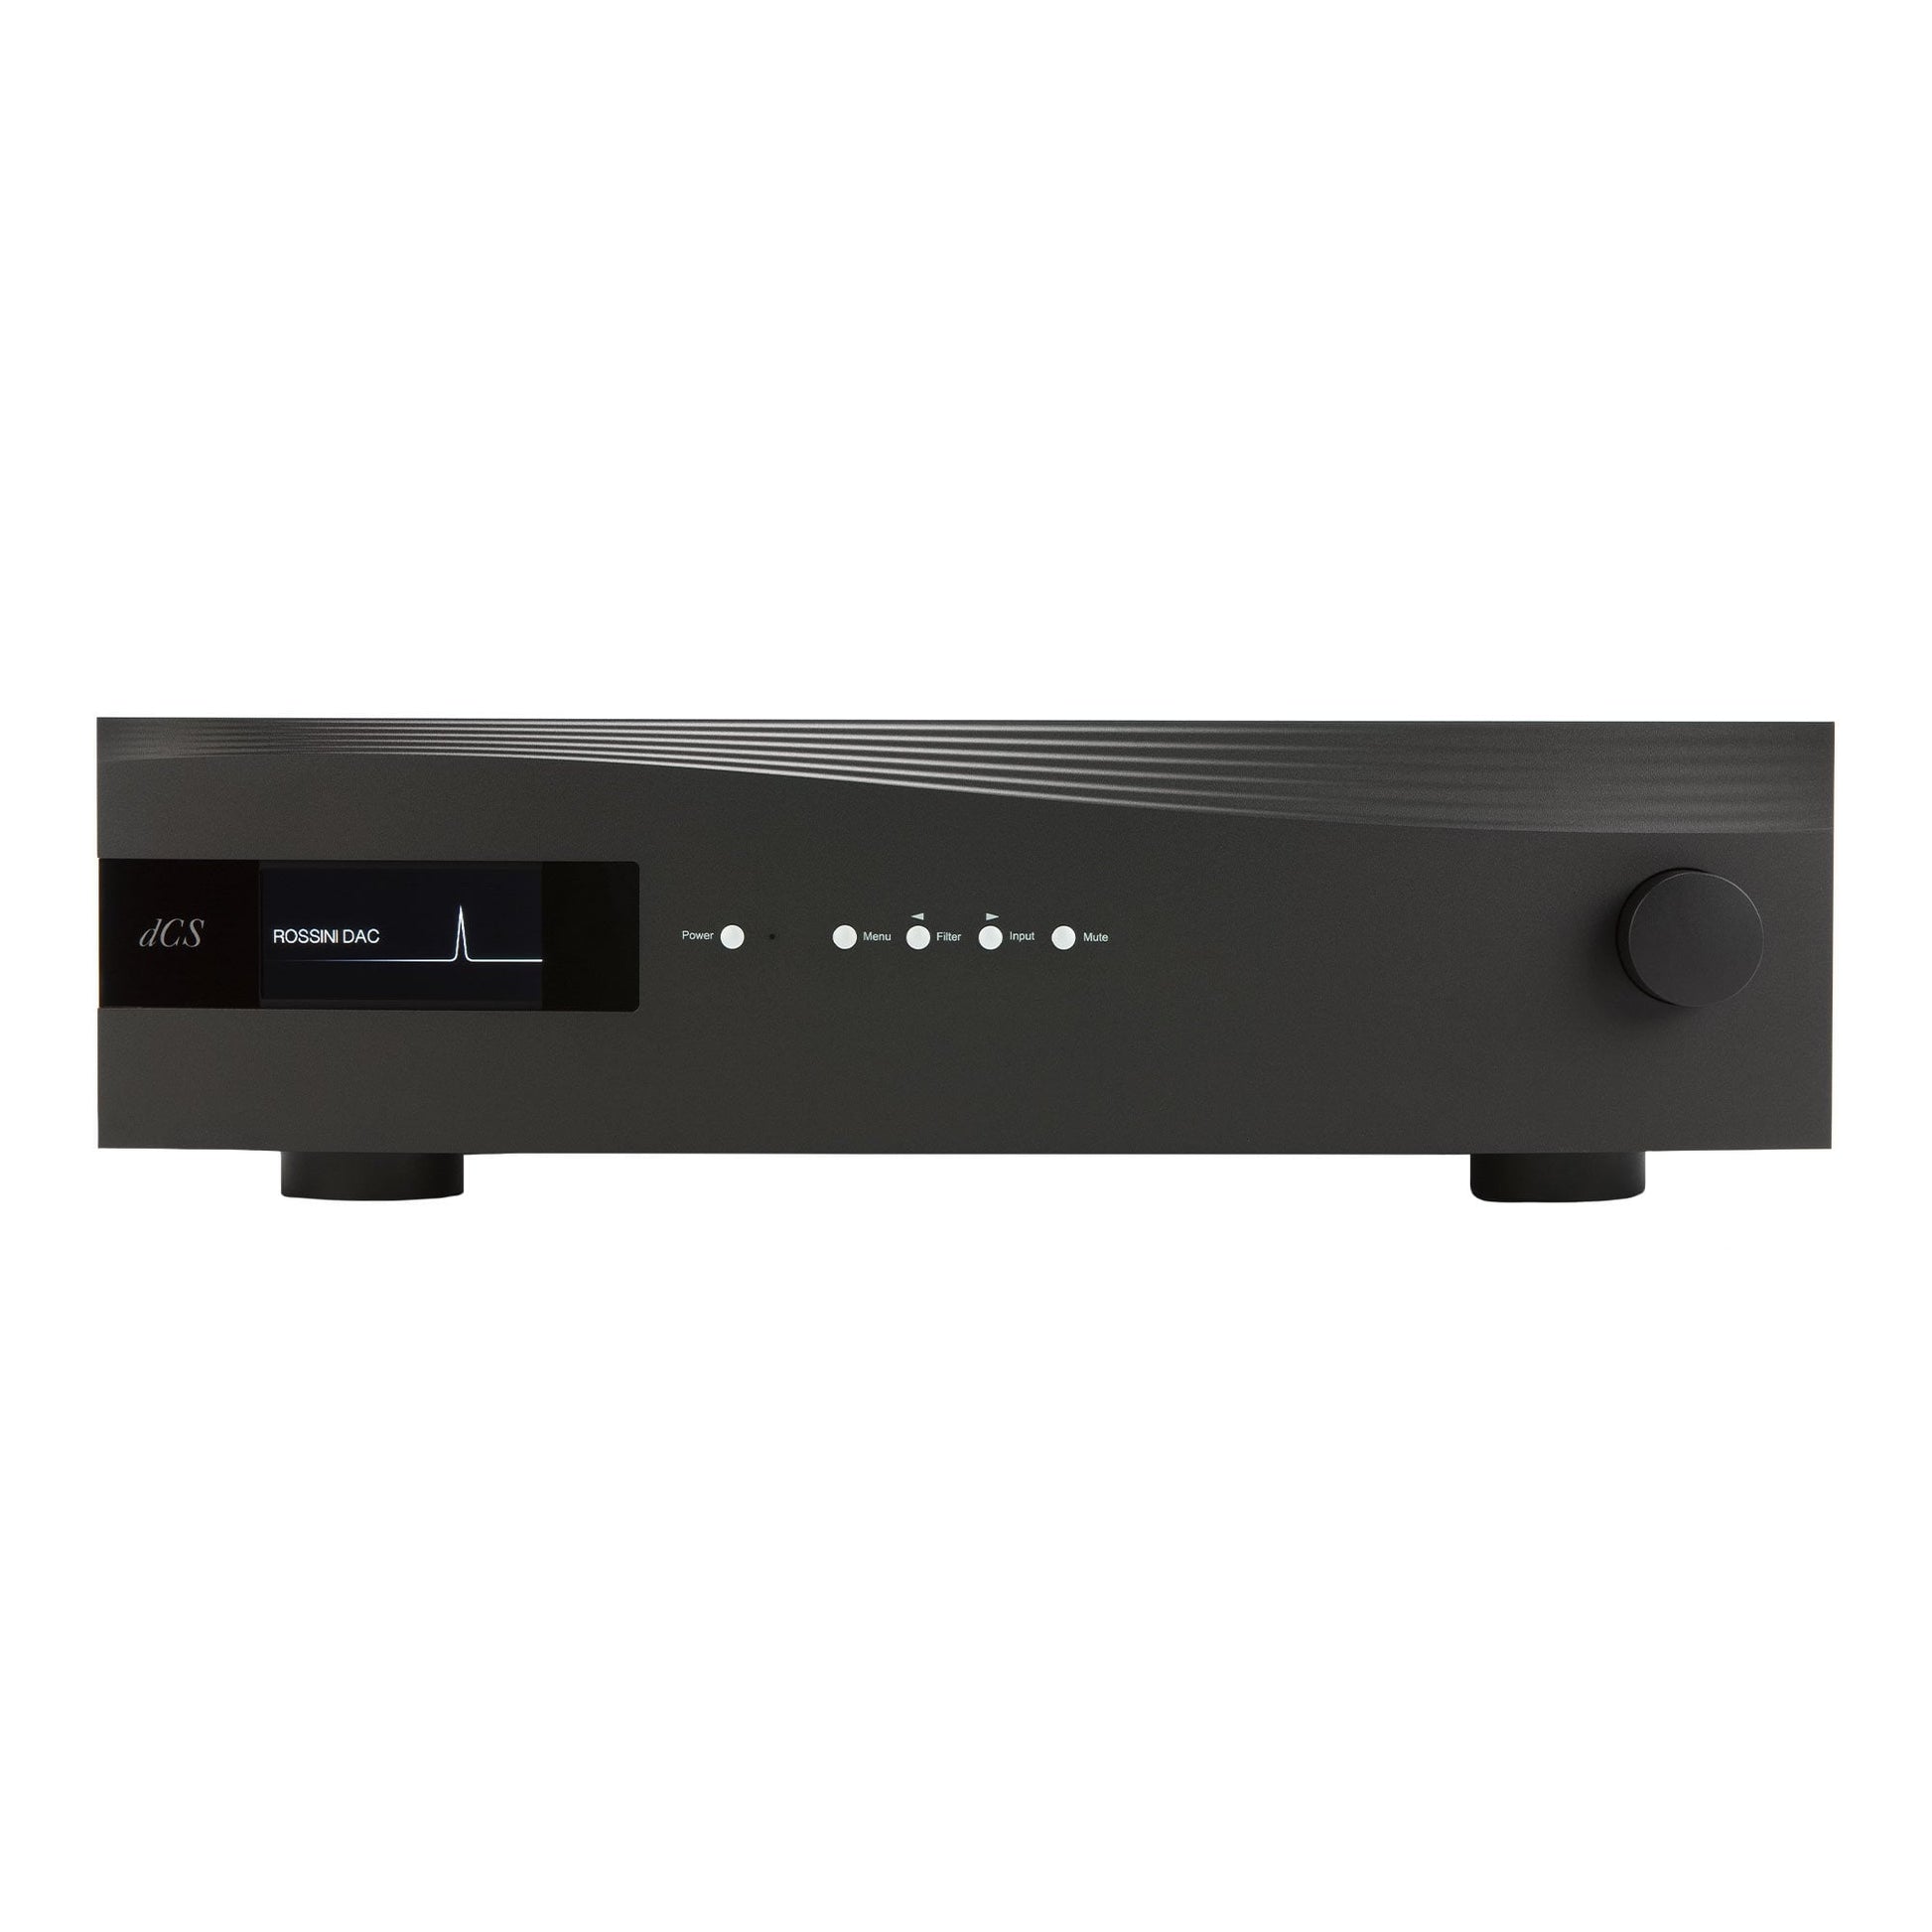 Combining robust engineering with an elegant aesthetic, the Rossini is built to withstand even the most intensive use and deliver a truly immersive sound at all levels and outputs. With its flexible, future-proof design, it’s a system that can grow and evolve, delivering a state-of-the-art listening experience for years to come.